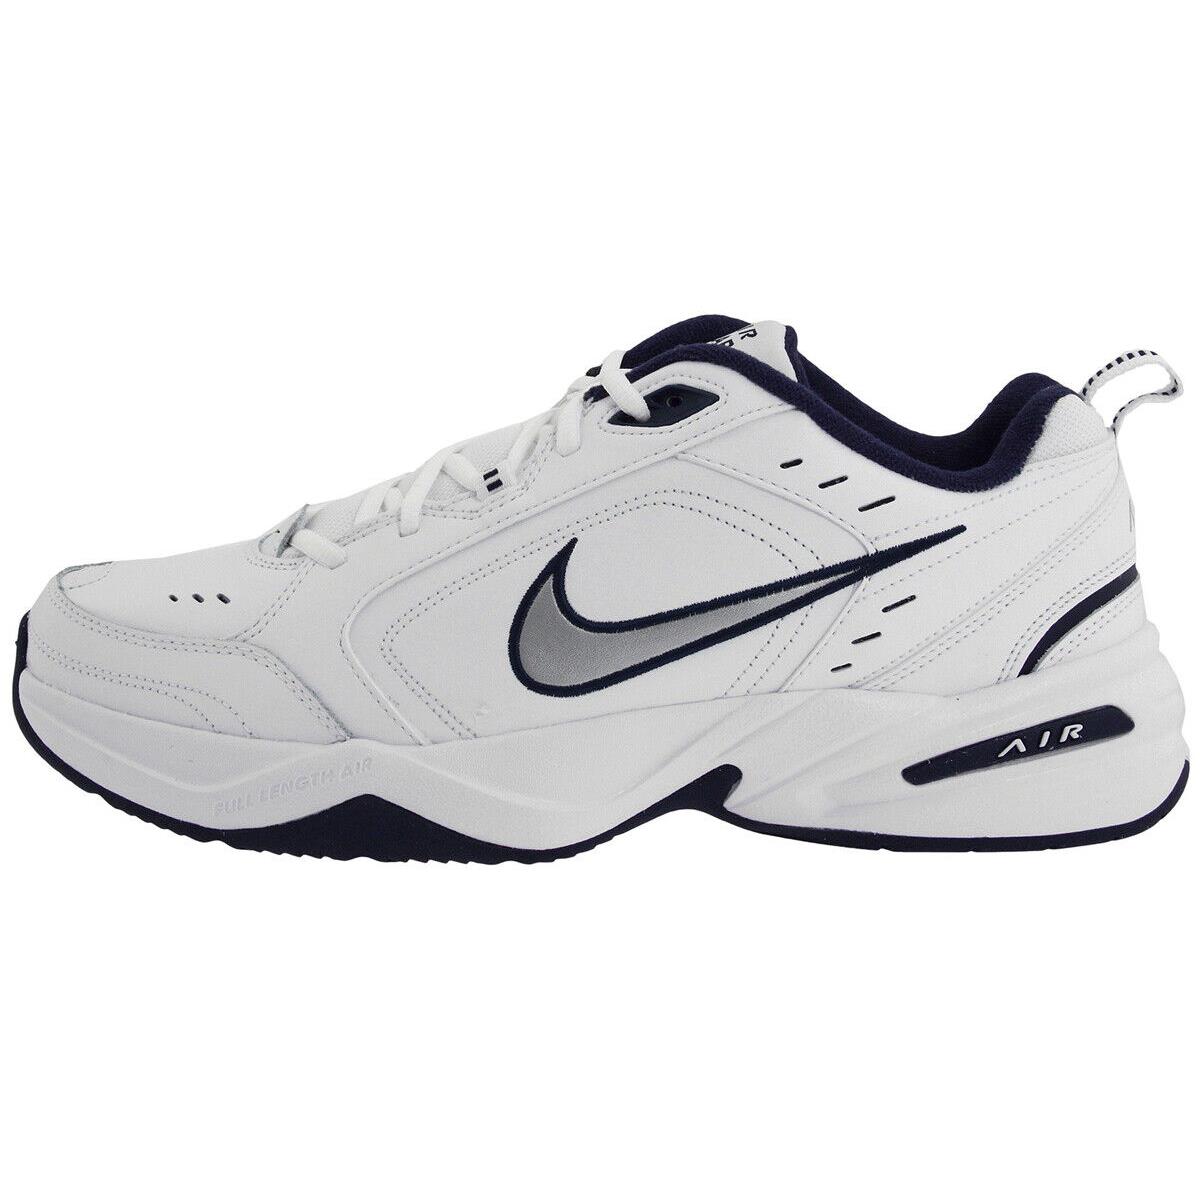 Nike Air Monarch IV 4 Trainer Athletic Men Size Shoes White/Metallic Silver